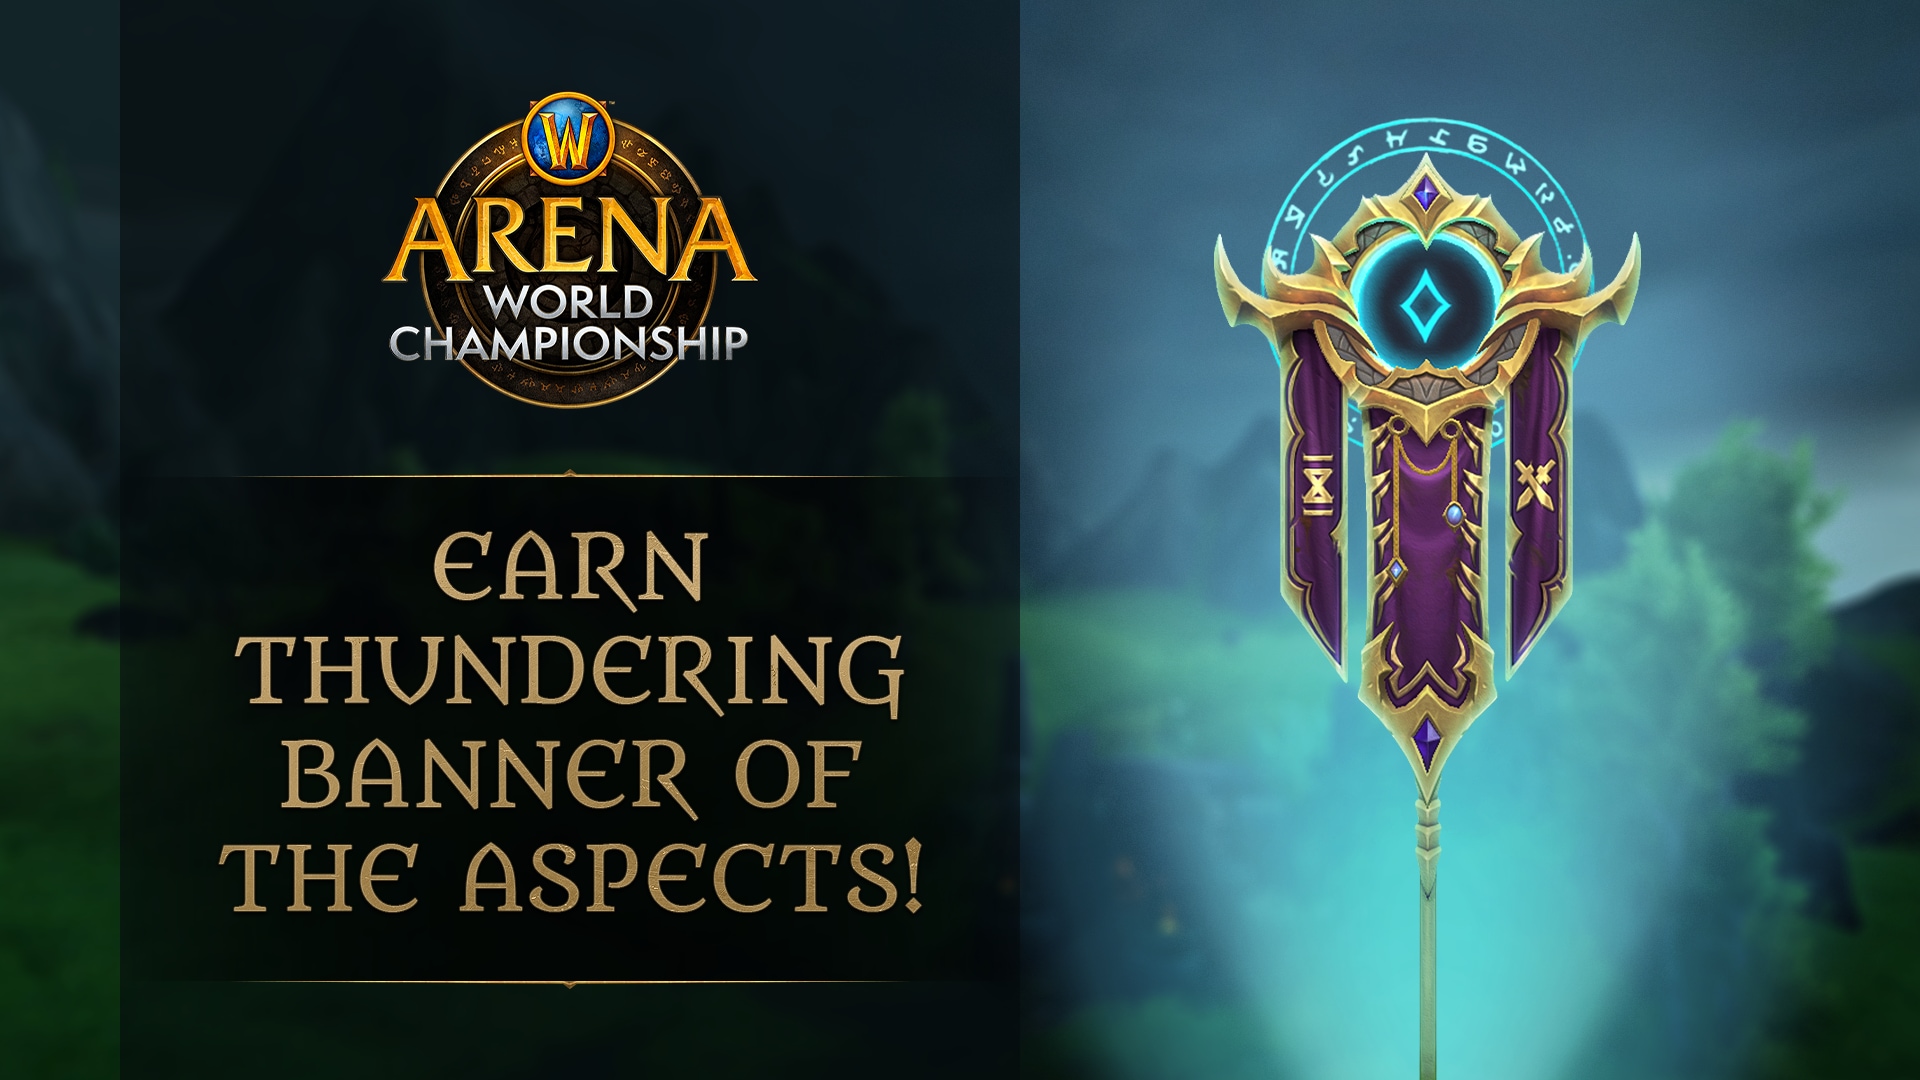 Earn the Thundering Banner of the Aspects by competing in at least one Cup!